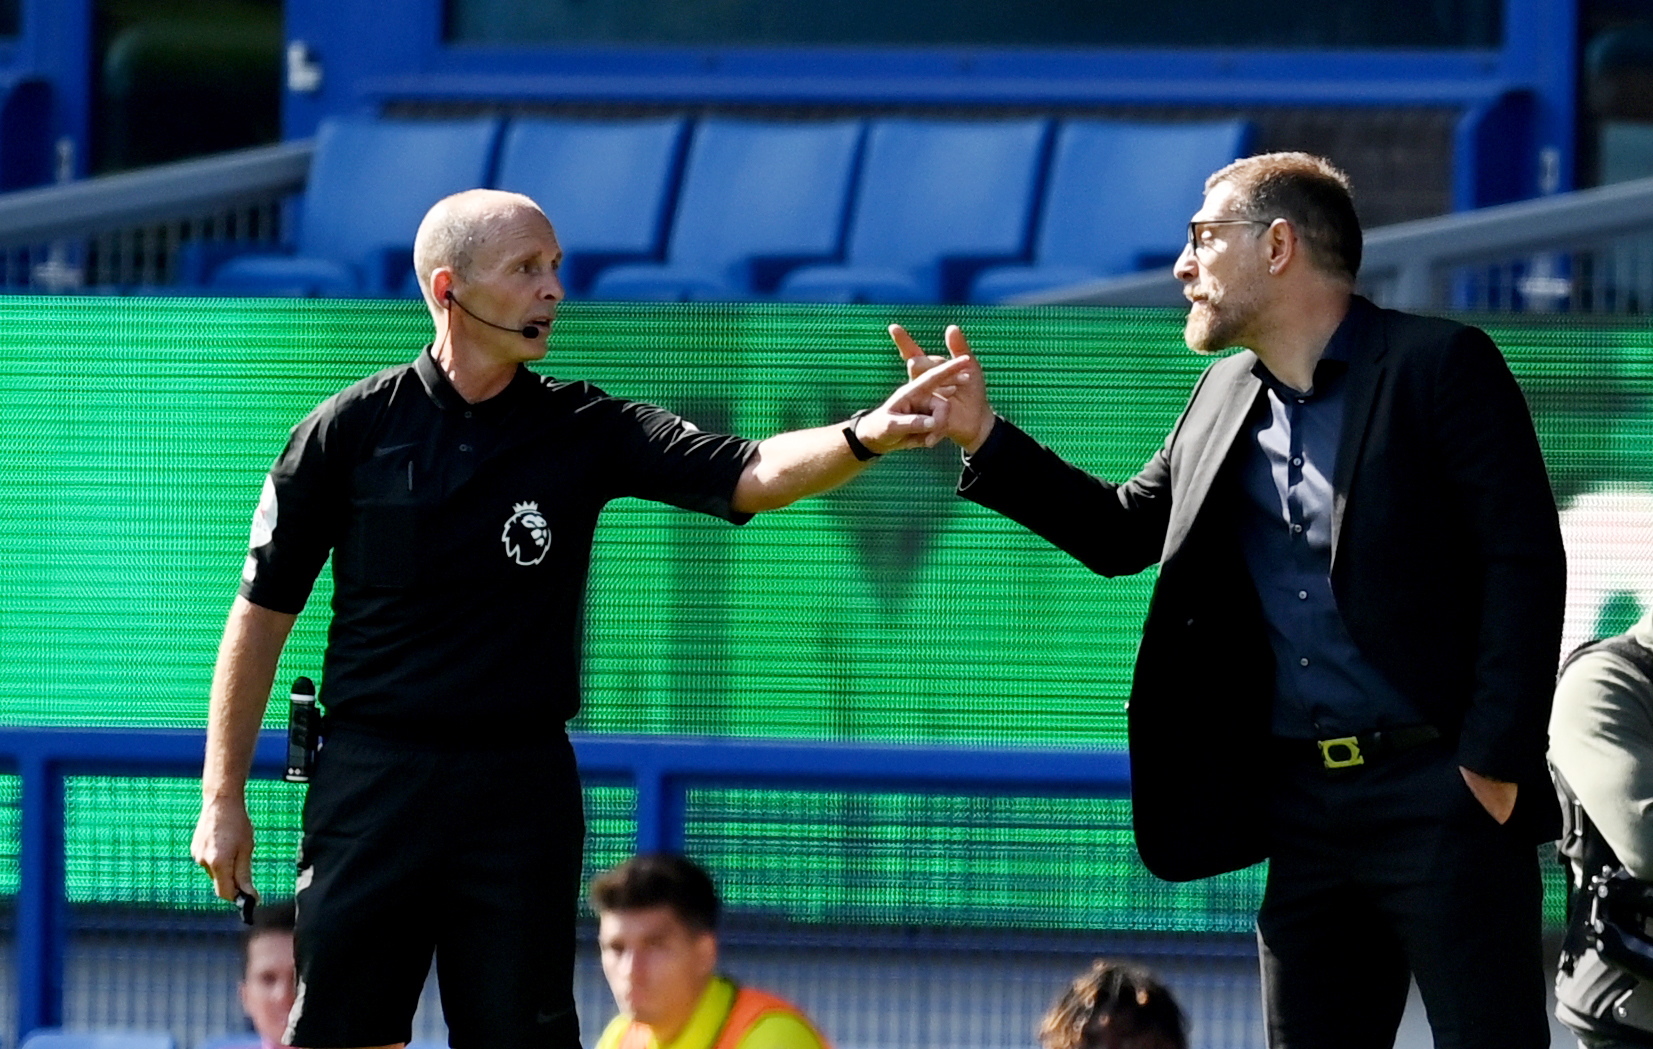 epa08680739 West Bromwich Albion's manager Slaven Bilic (R) speaks with referee Mike Dean during the English Premier League match between Everton and West Bromwich Albion in Liverpool, Britain, 19 September 2020.  EPA/Michael Regan / POOL EDITORIAL USE ONLY. No use with unauthorized audio, video, data, fixture lists, club/league logos or 'live' services. Online in-match use limited to 120 images, no video emulation. No use in betting, games or single club/league/player publications.